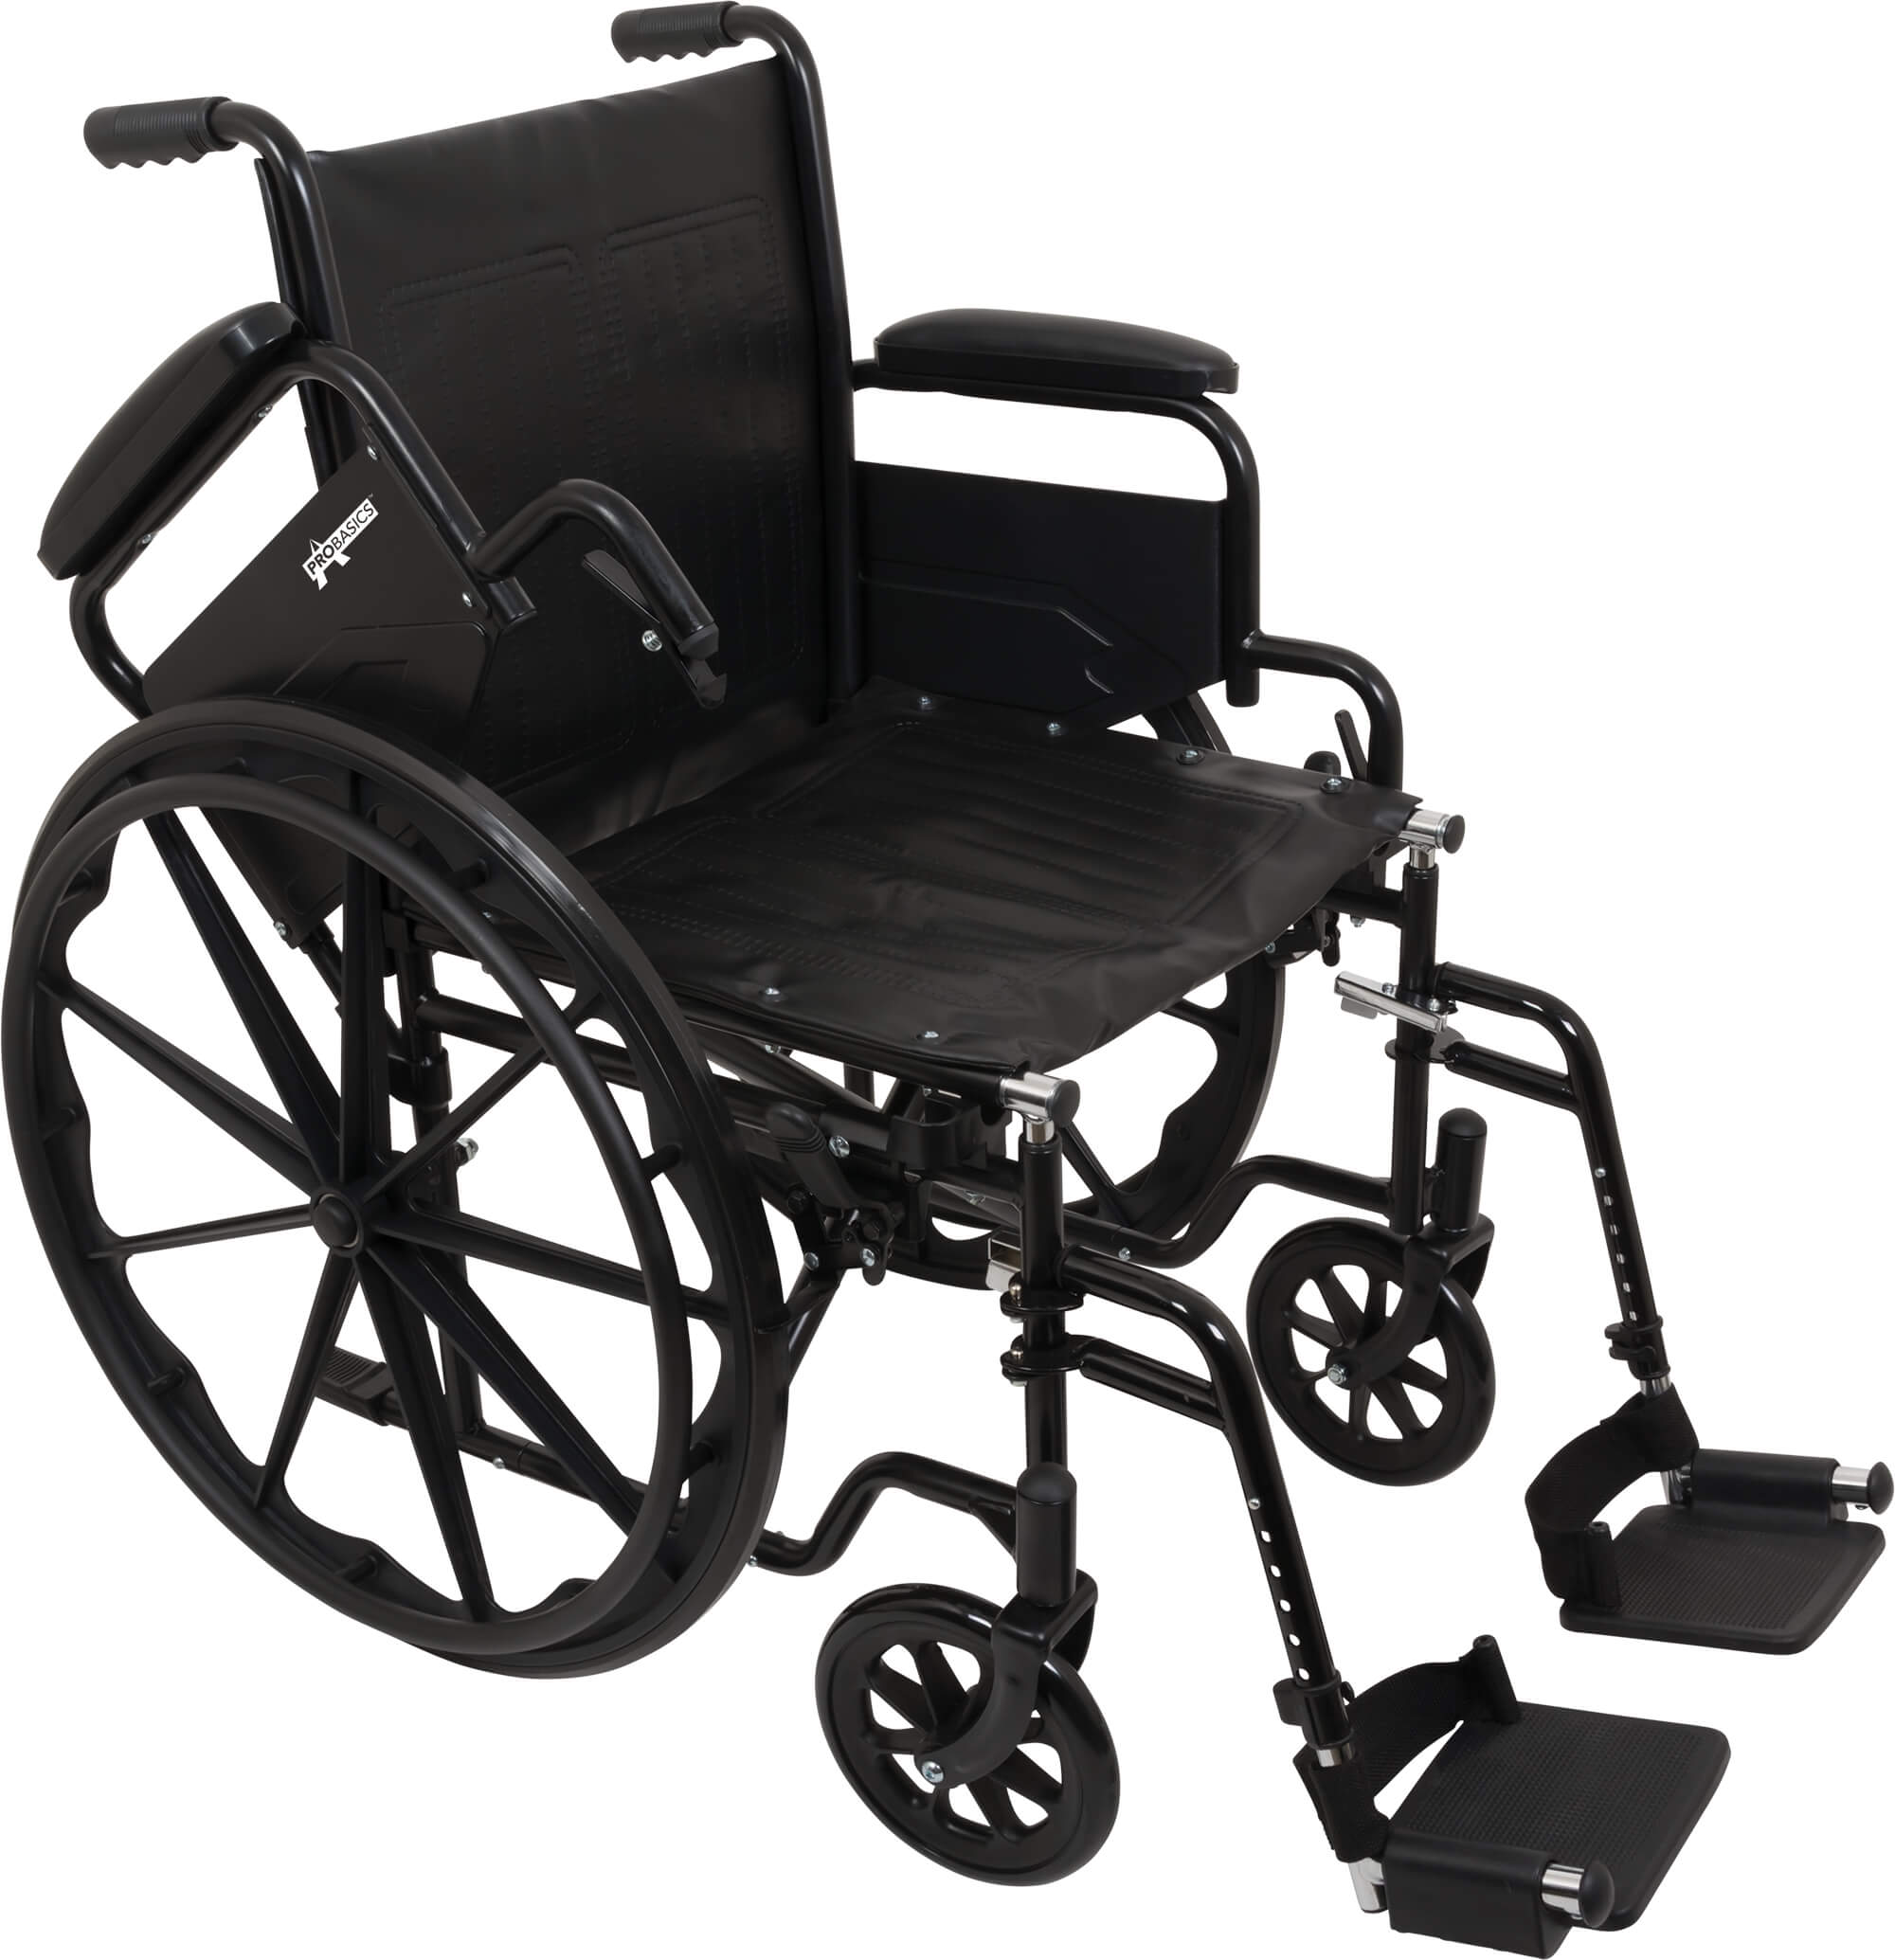 Wheelchairs & Transport Chairs